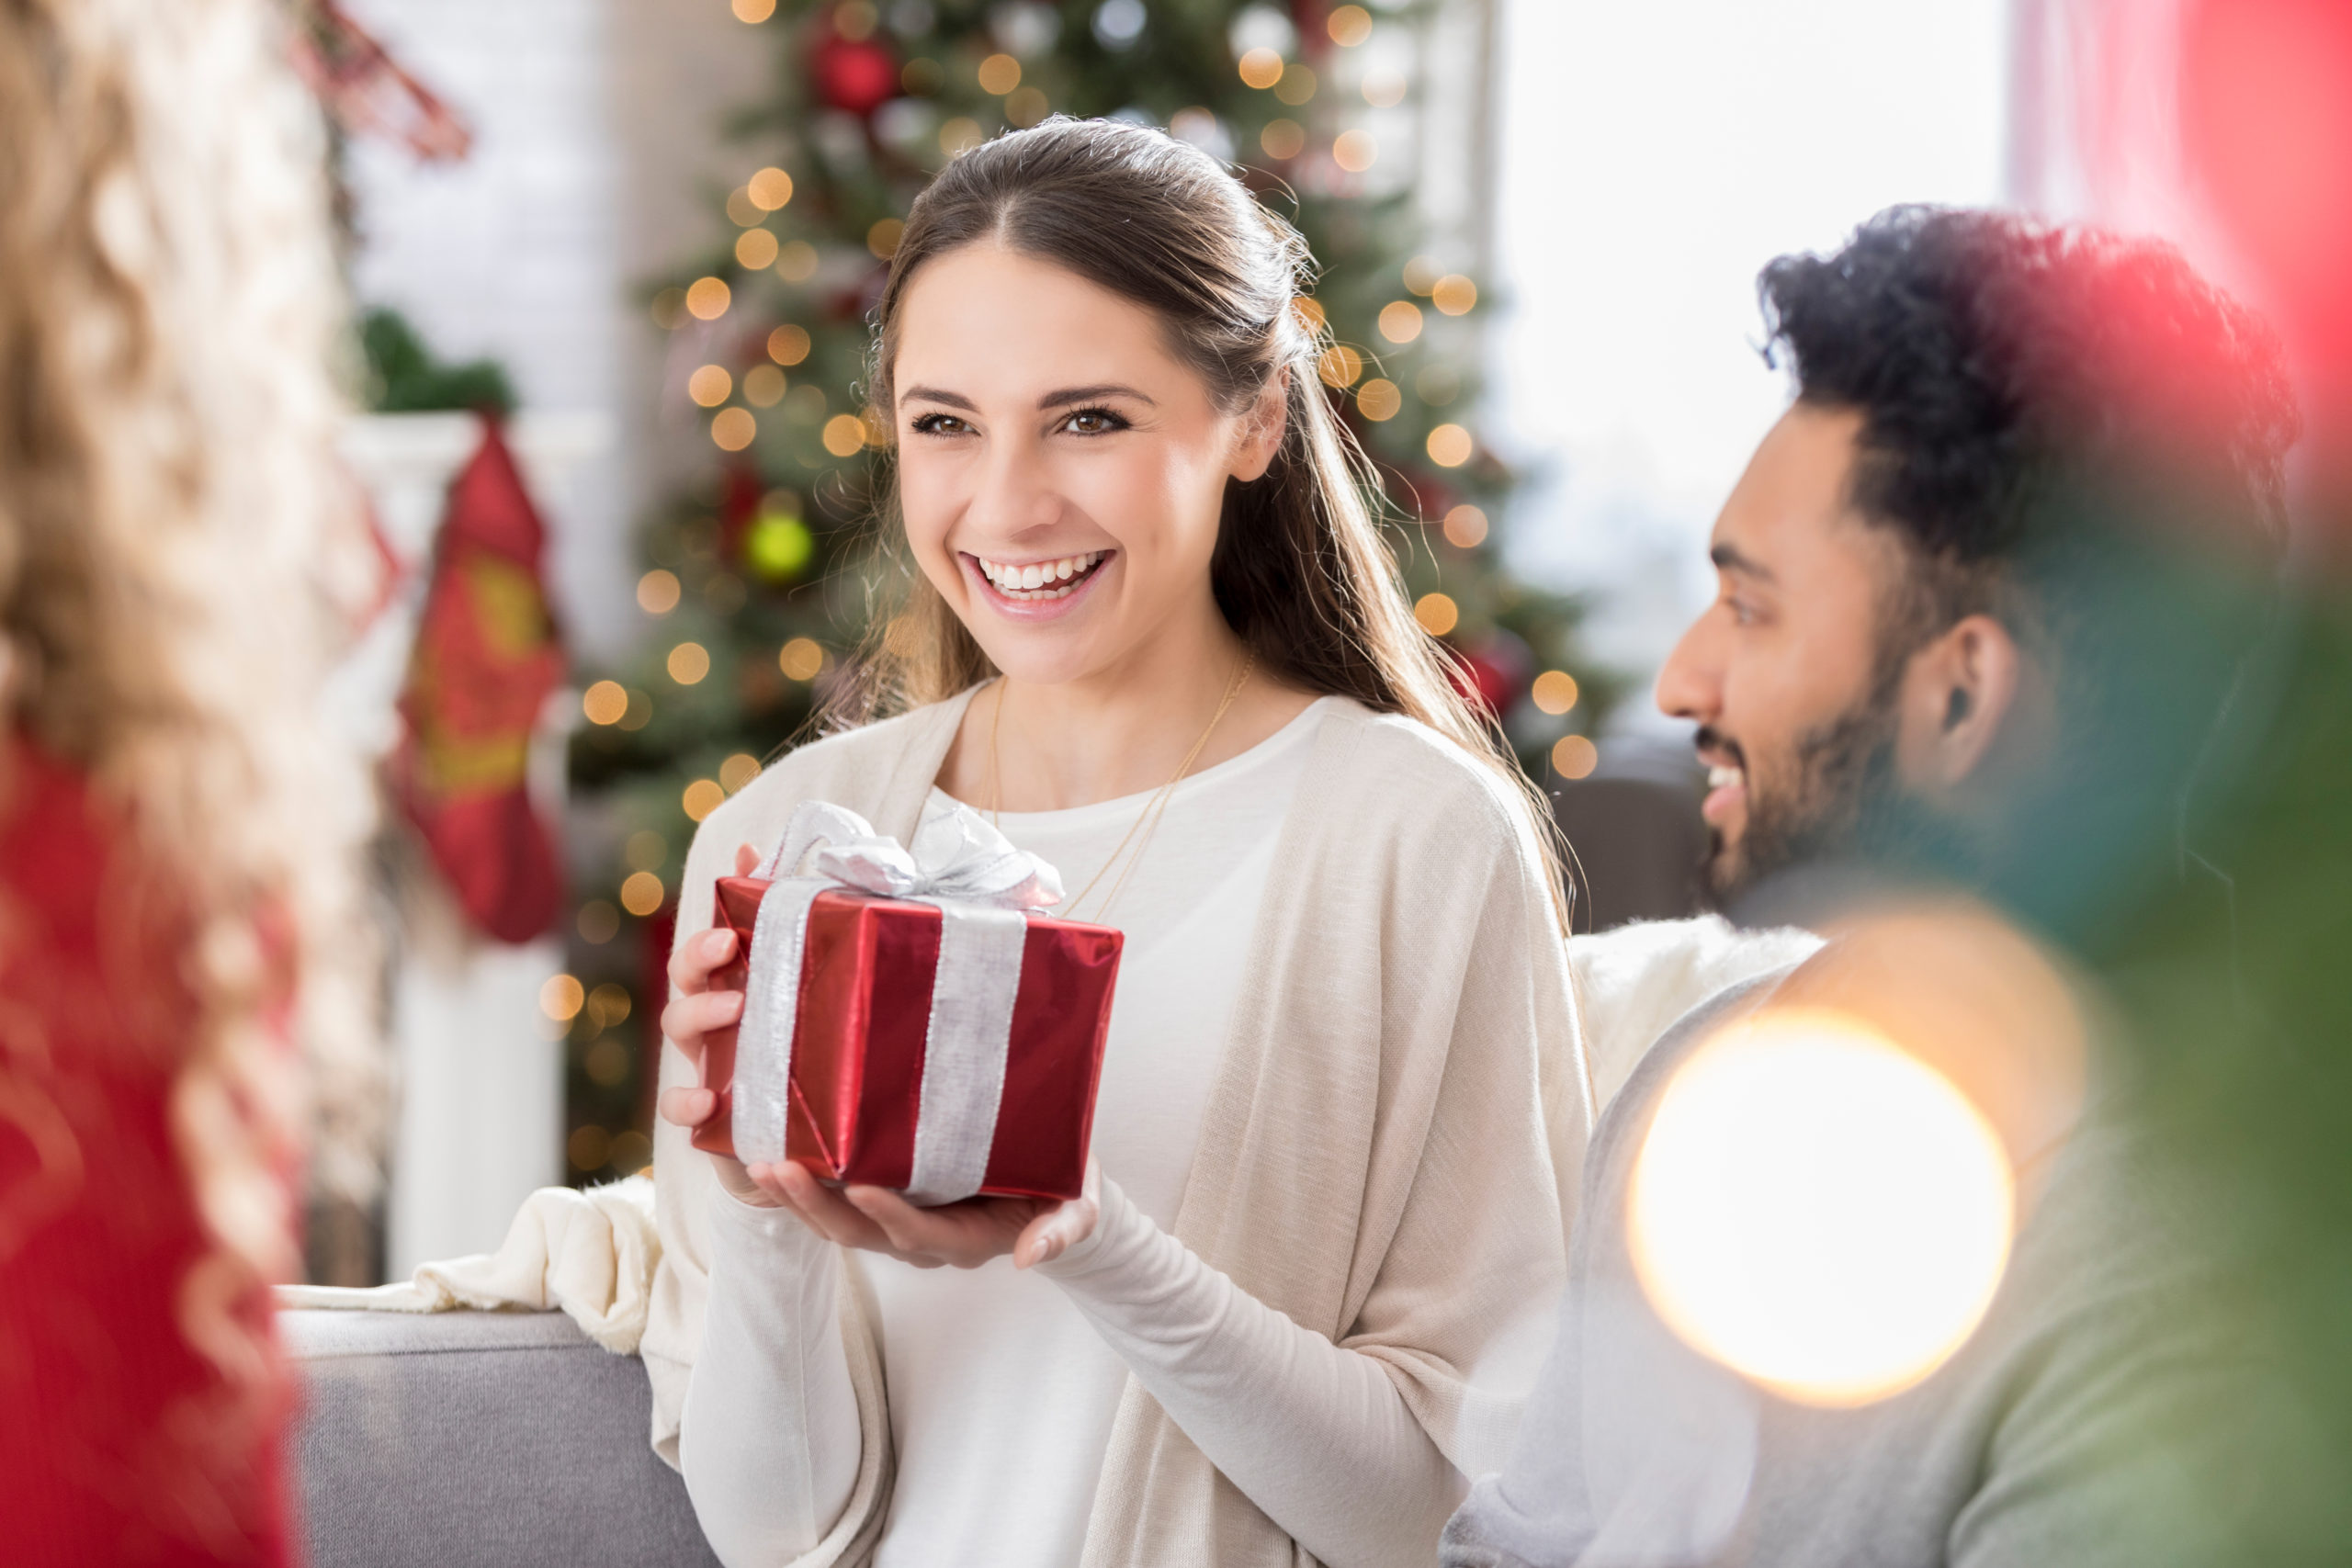 Millennial friends exchange gifts at Christmas